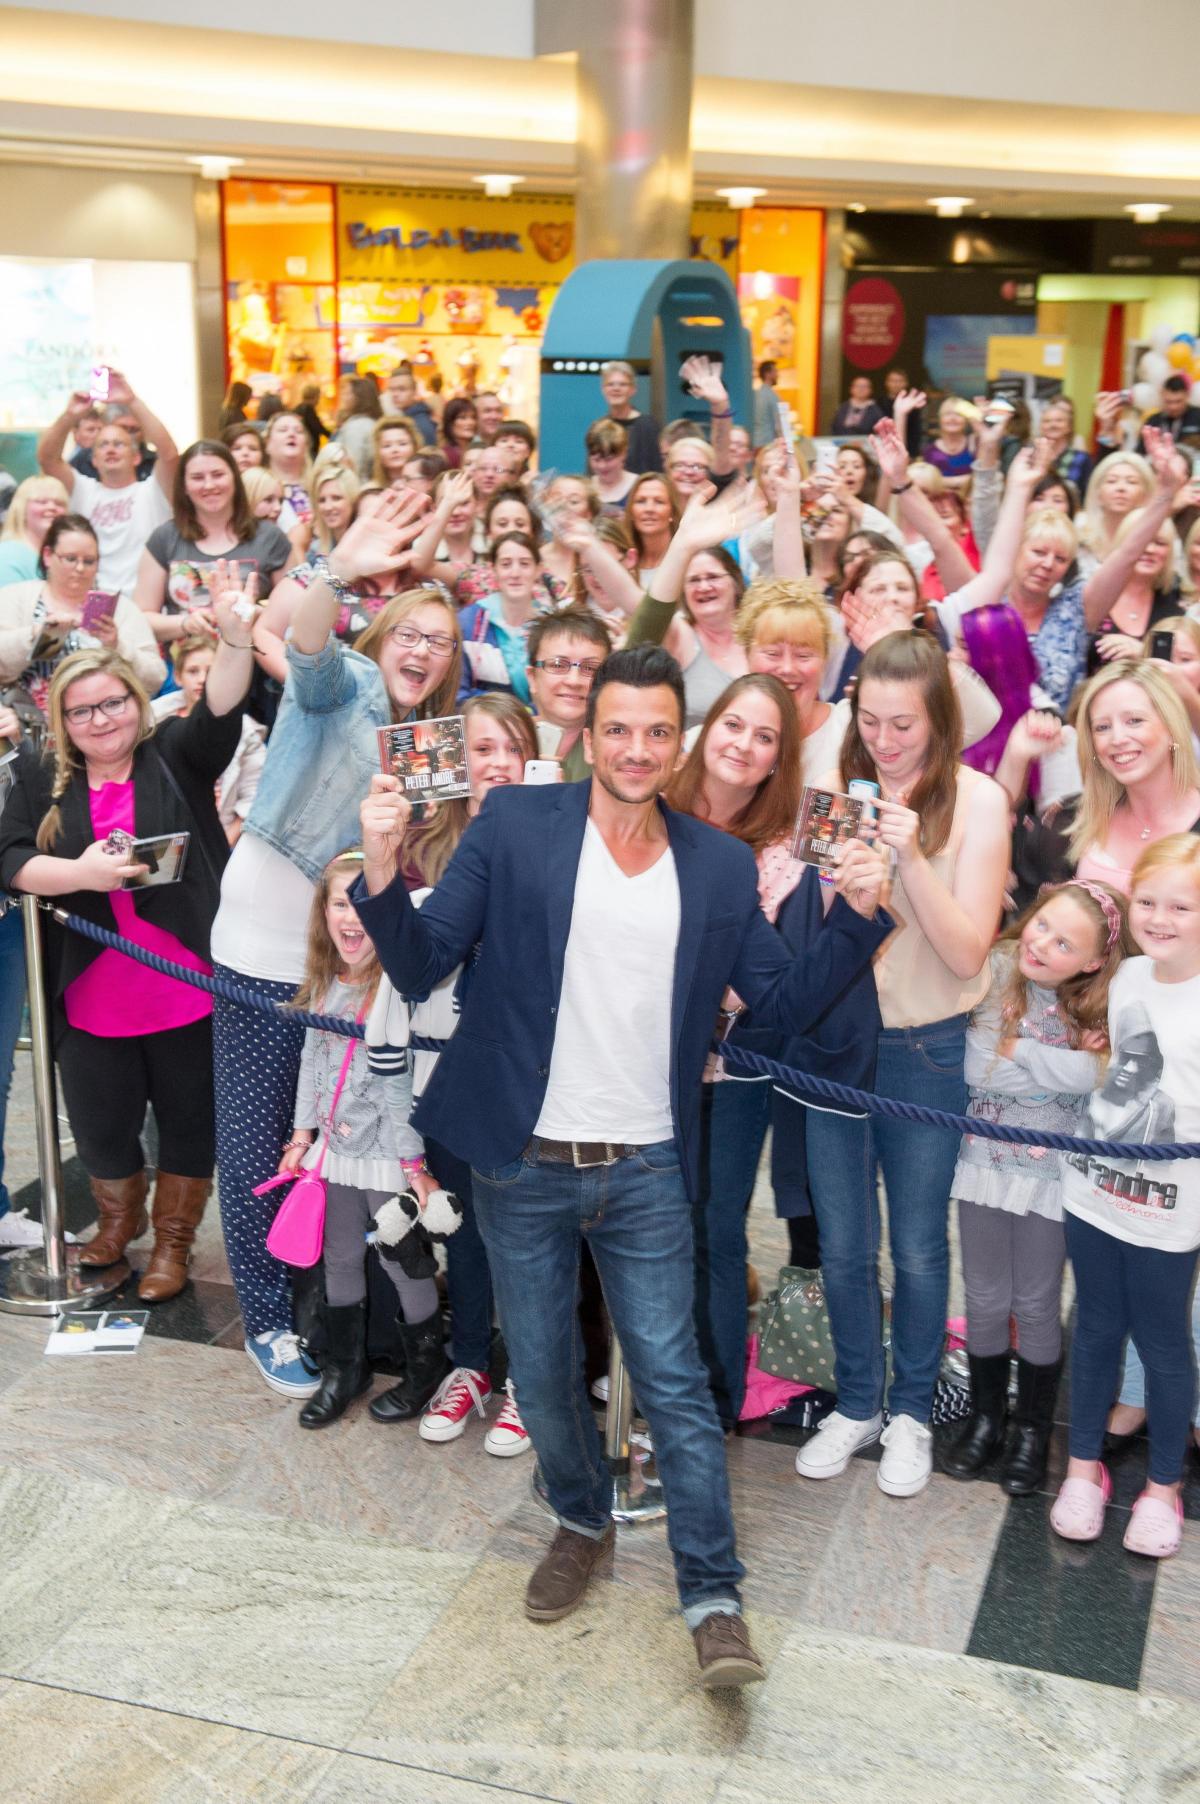 Peter Andre at WestQuay shopping centre. Weekend in Pictures. Saturday May 31, 2014 - Sunday June 1, 2014.